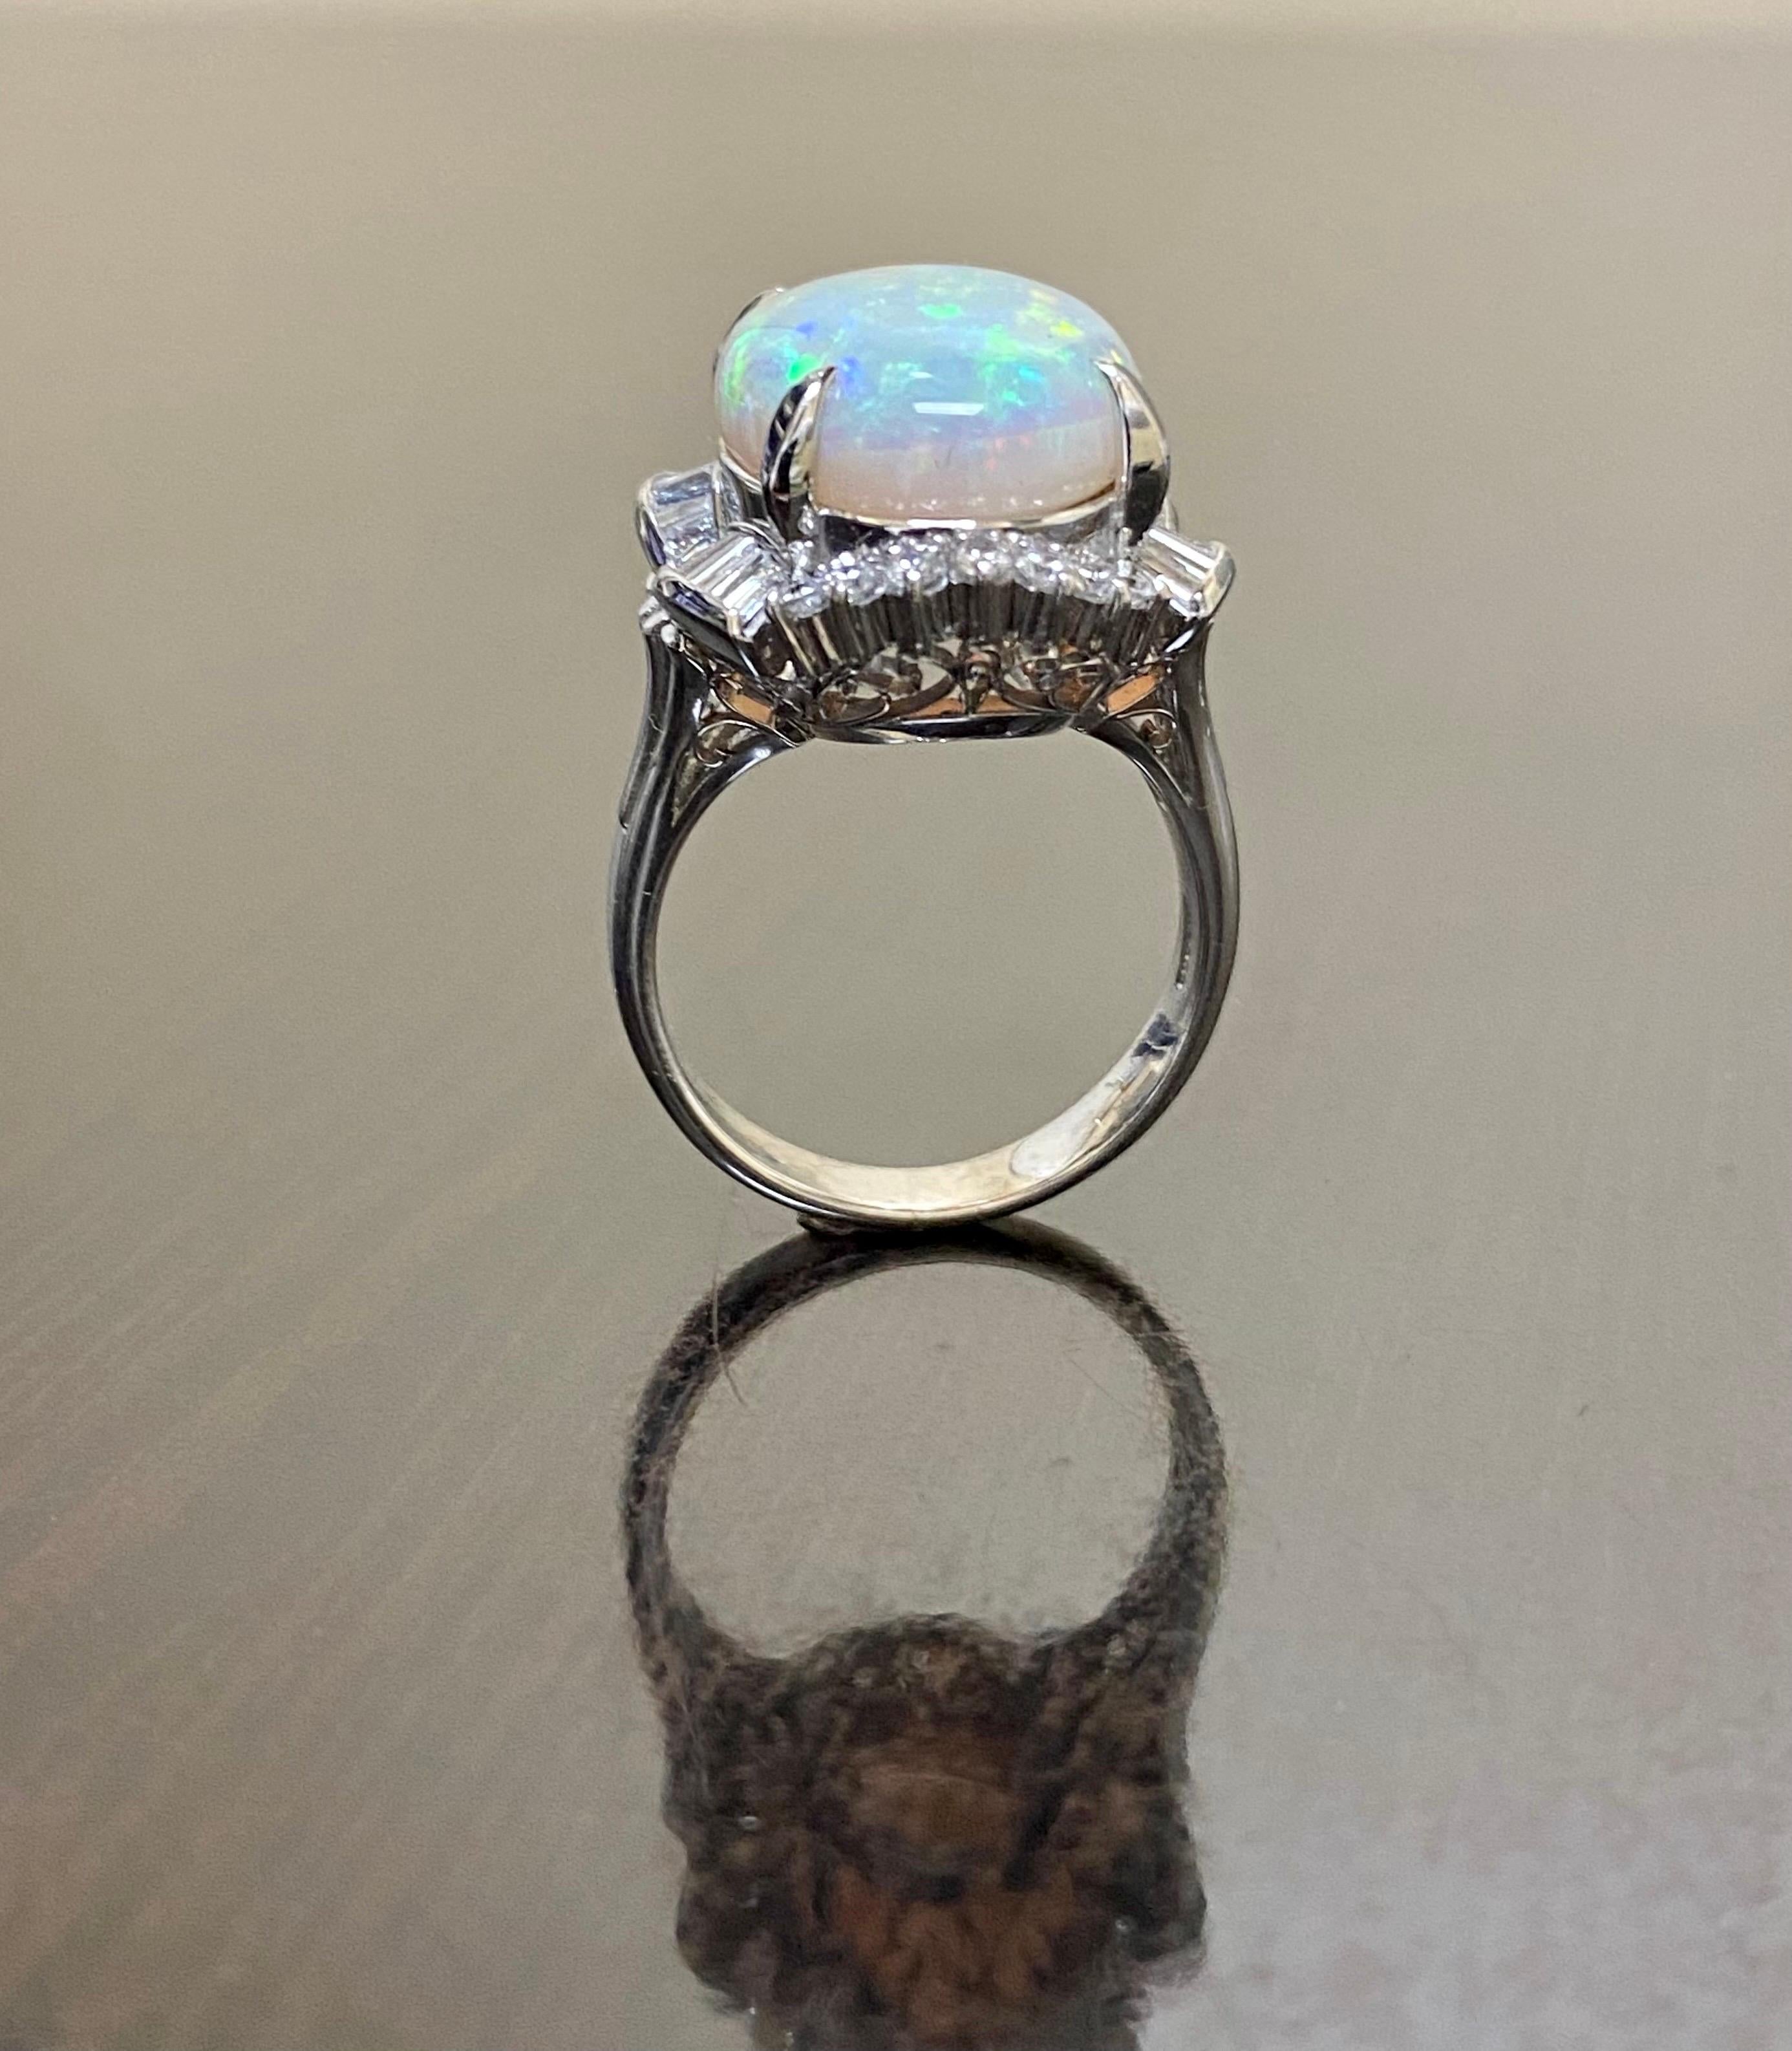 DeKara Designs Collection

Our latest design! An entirely handmade ONE OF A KIND elegant and lustrous 10.77 Carat Australian Opal surrounded by beautiful round and baguette diamonds in a platinum setting.

Metal- 90% Platinum, 10%